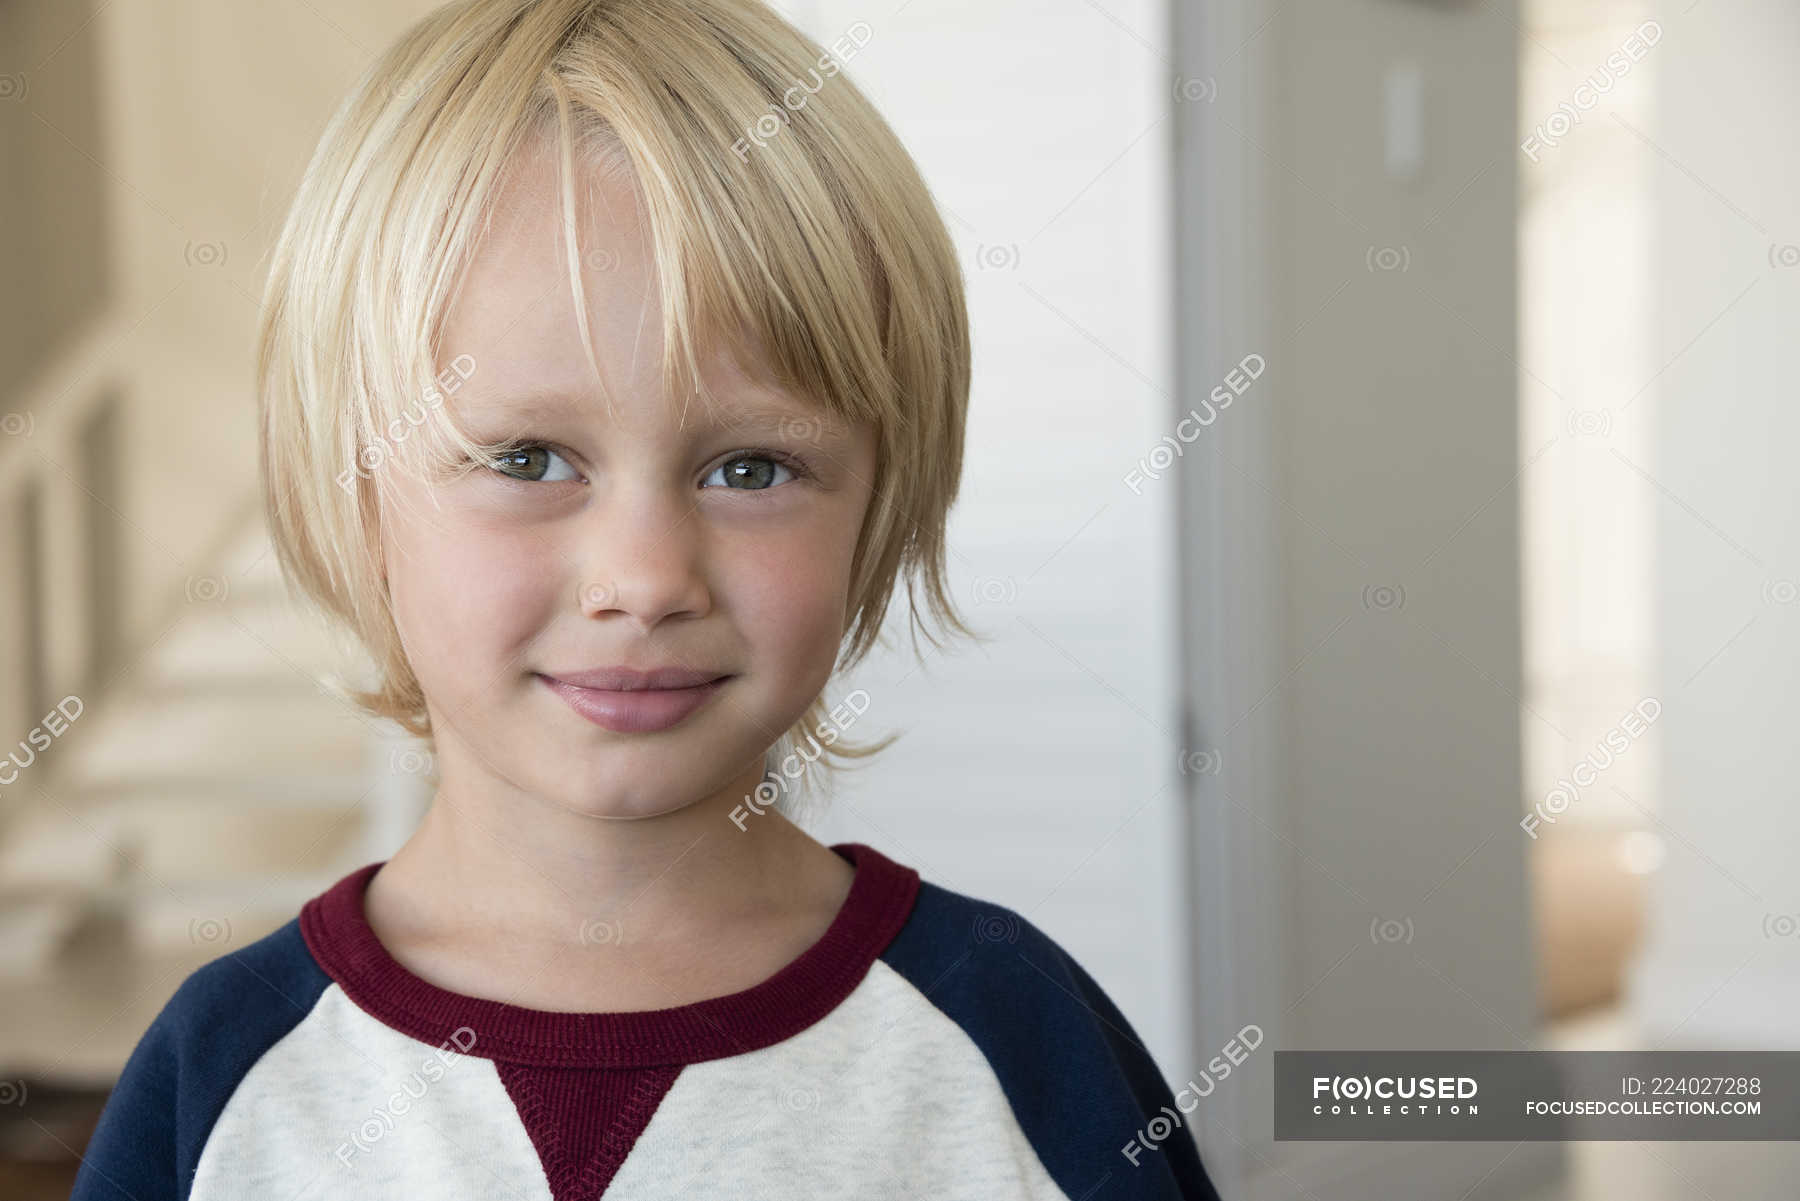 Portrait Of Happy Little Boy With Blonde Hair Looking At Camera